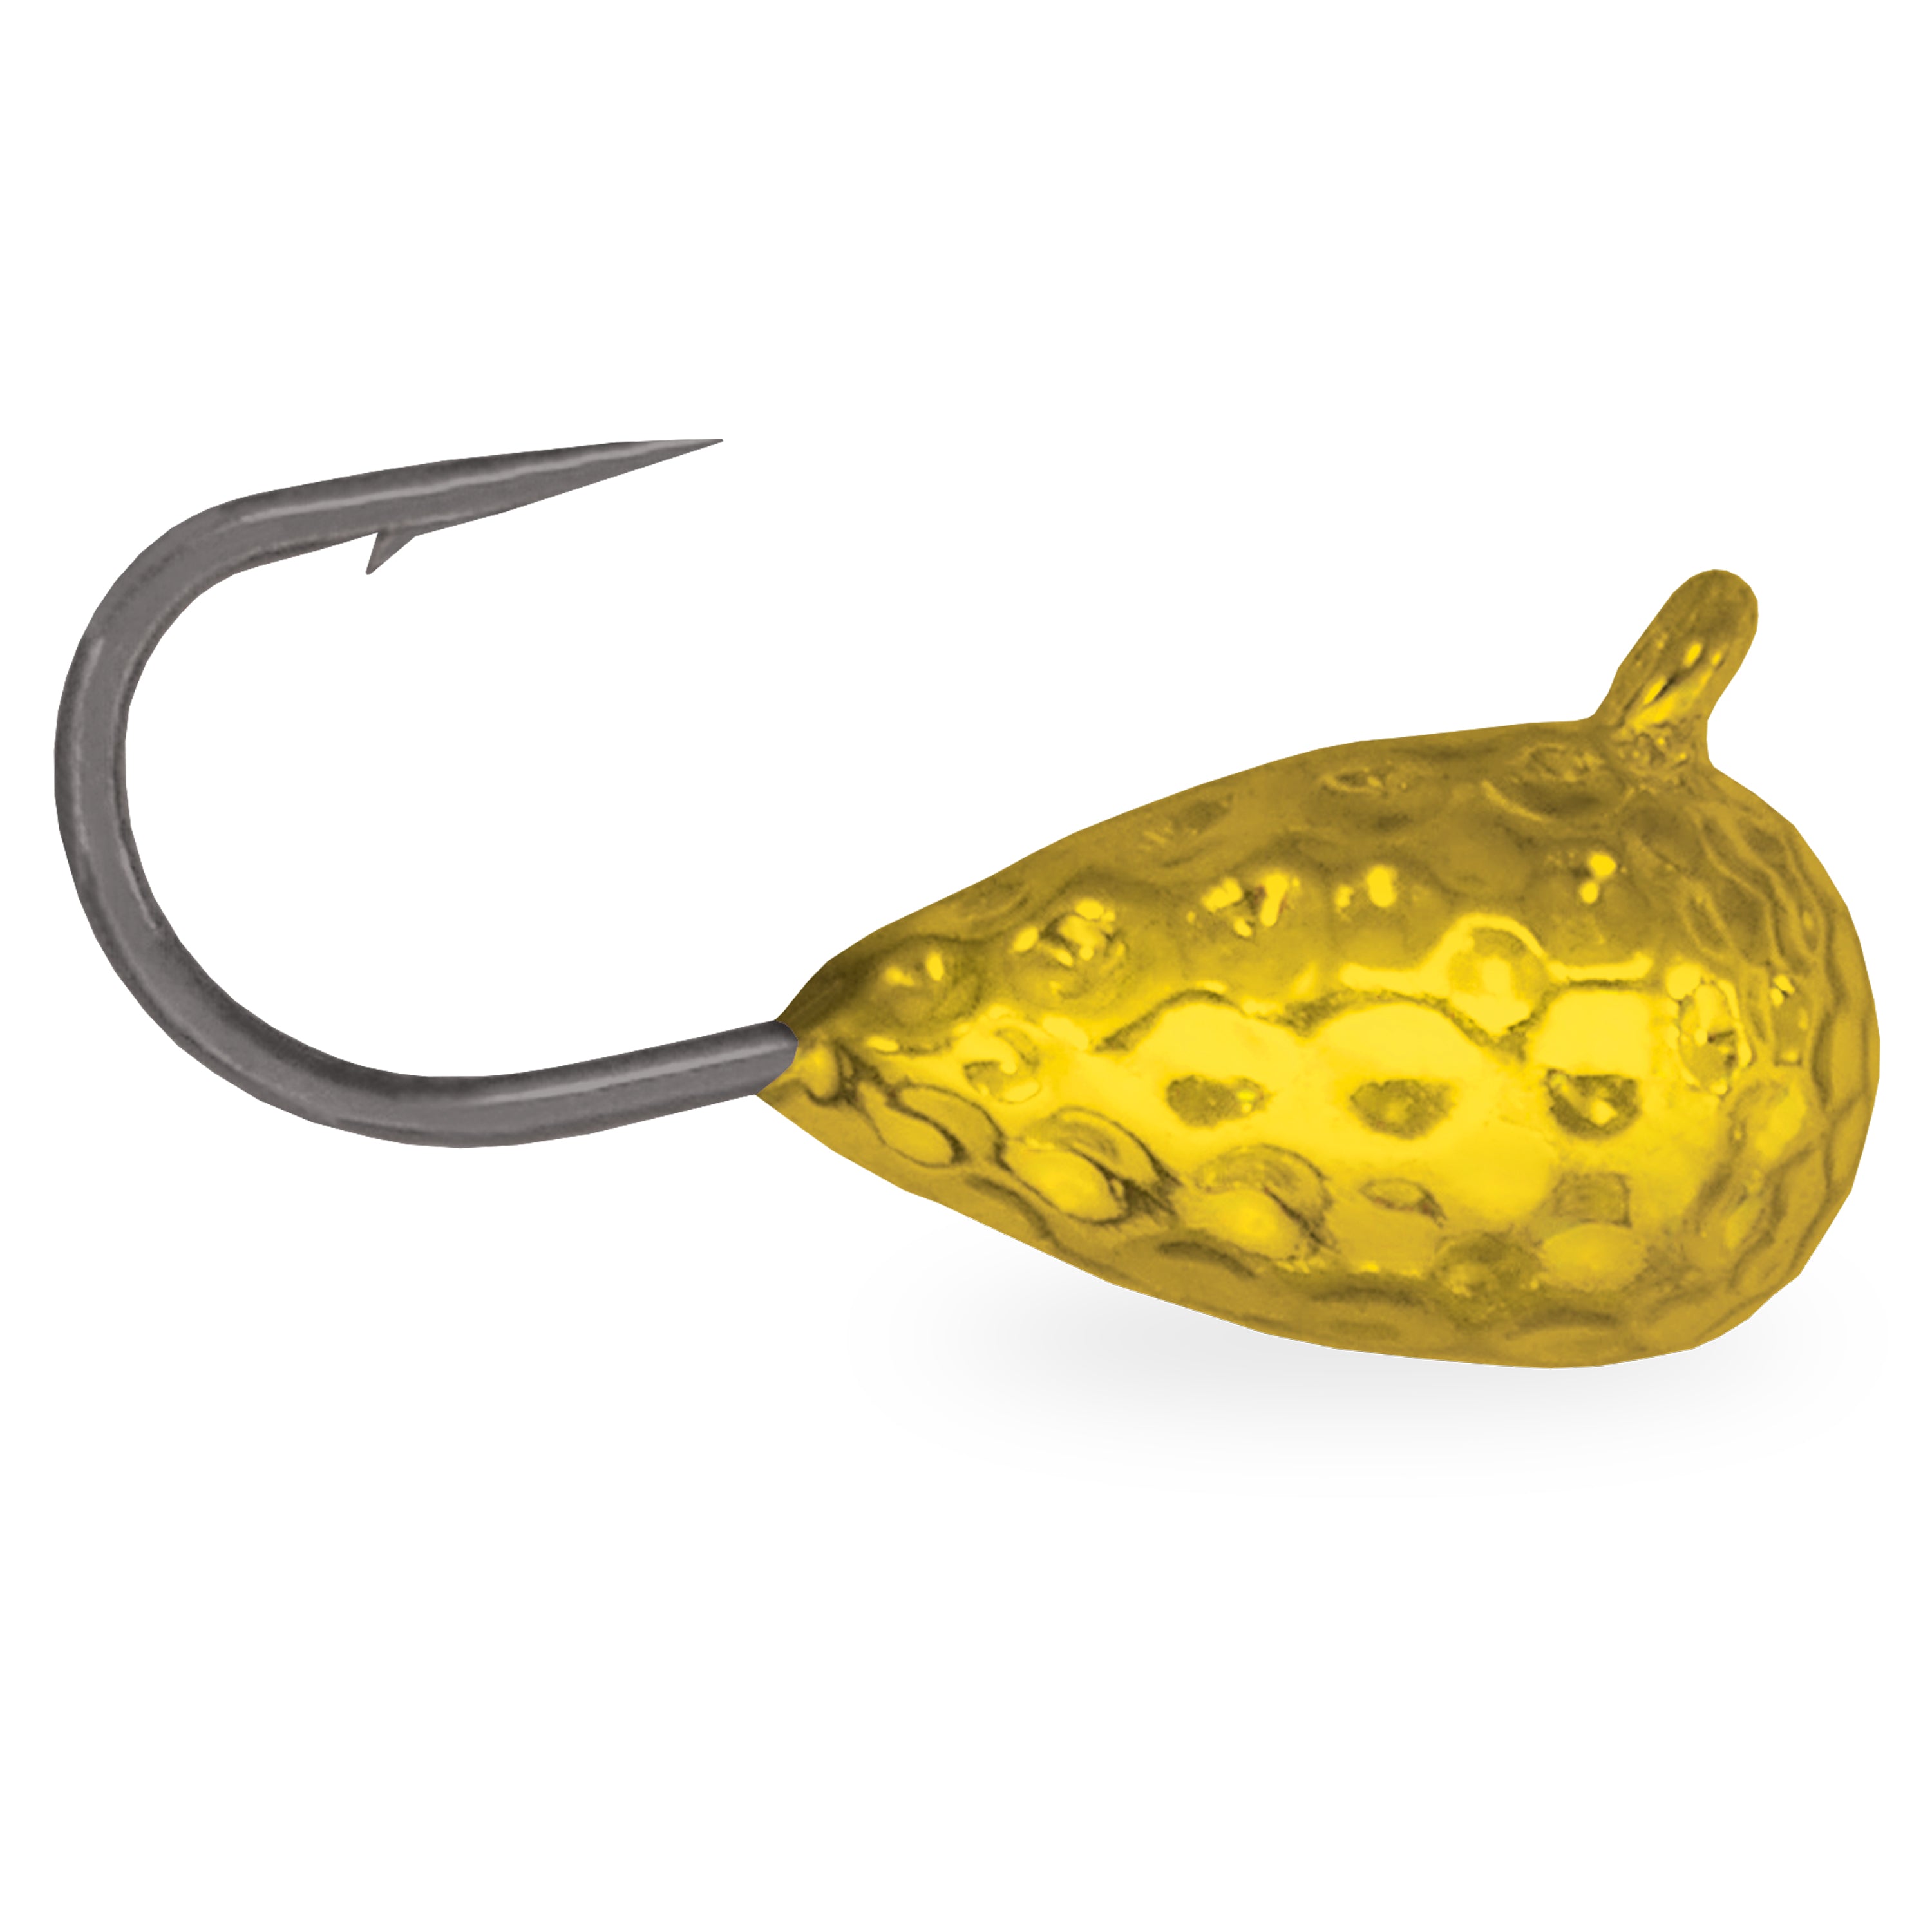 Acme Tackle 4mm Silver Hammered Tungsten Jig